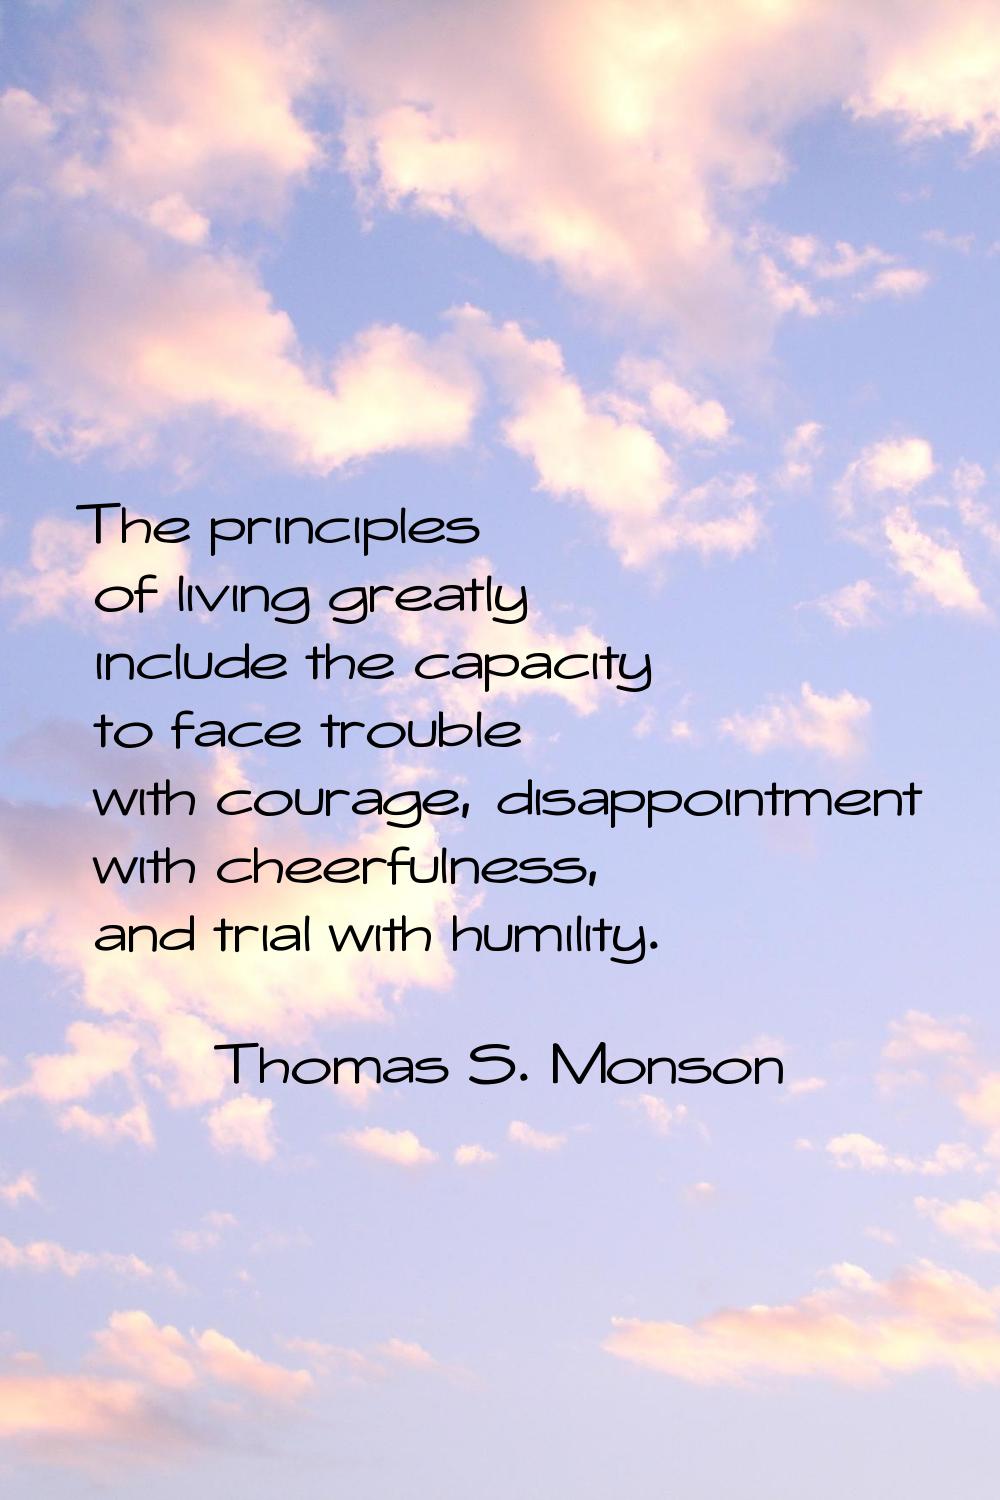 The principles of living greatly include the capacity to face trouble with courage, disappointment 